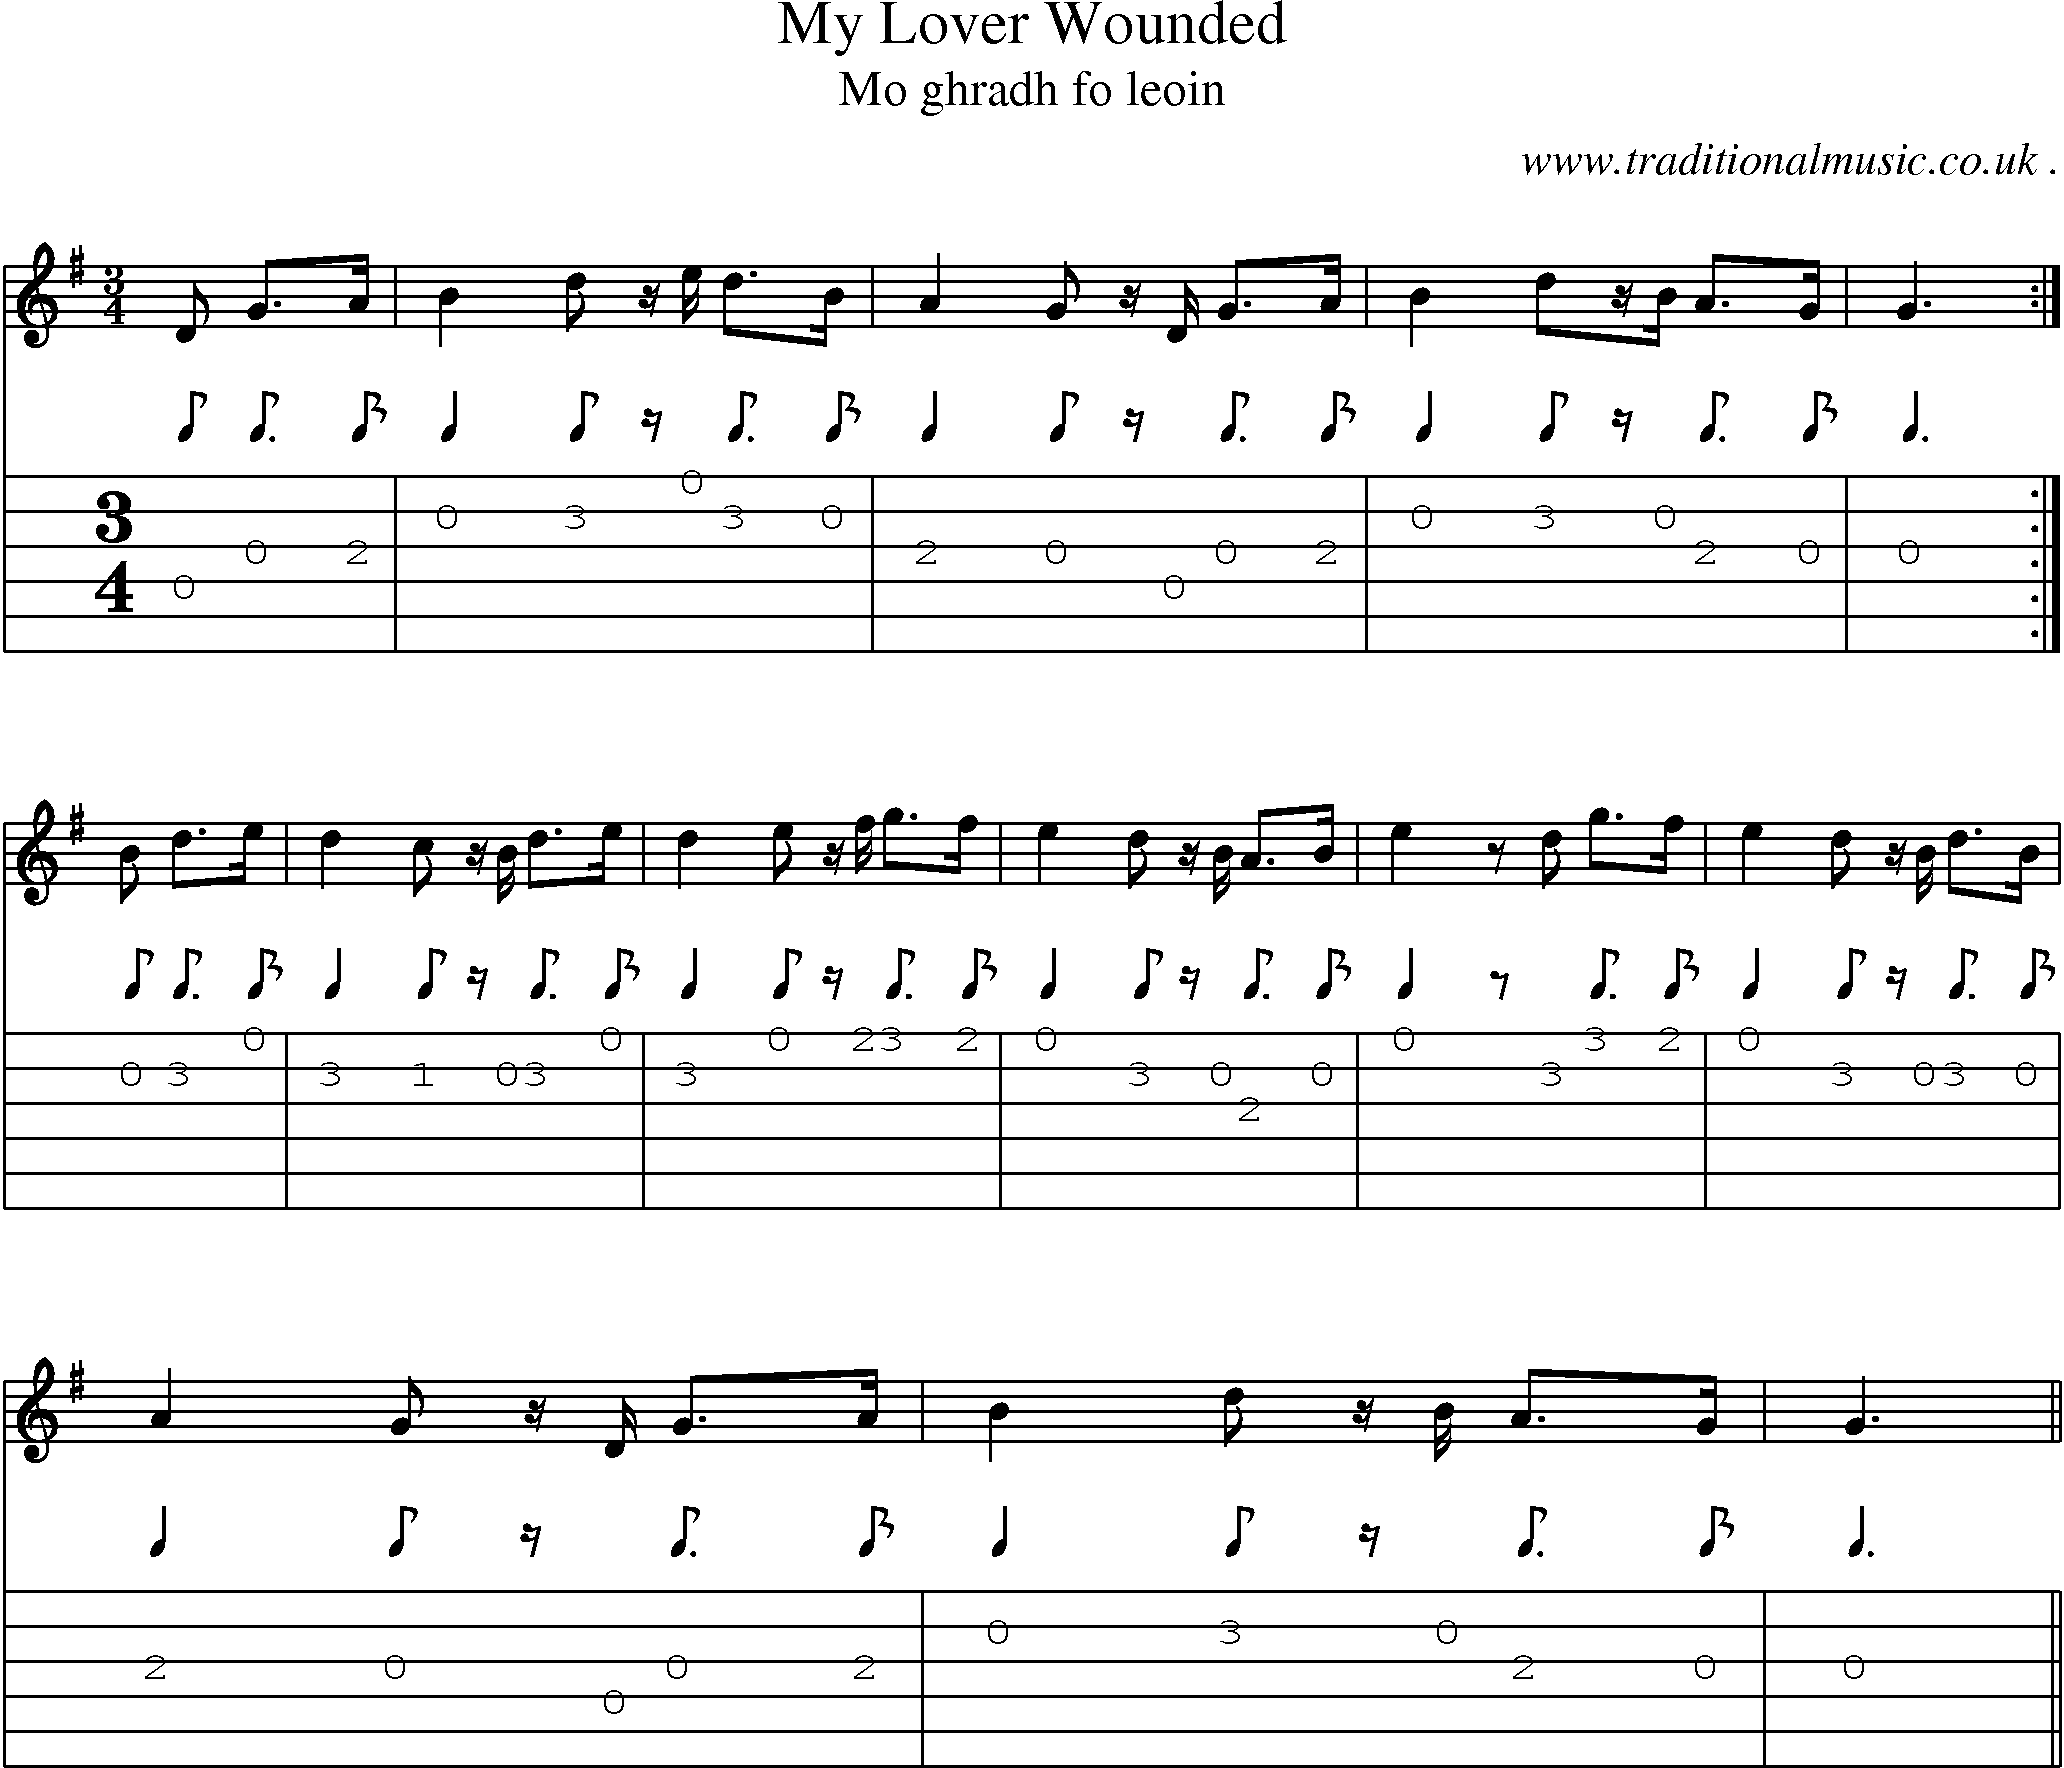 Sheet-music  score, Chords and Guitar Tabs for My Lover Wounded